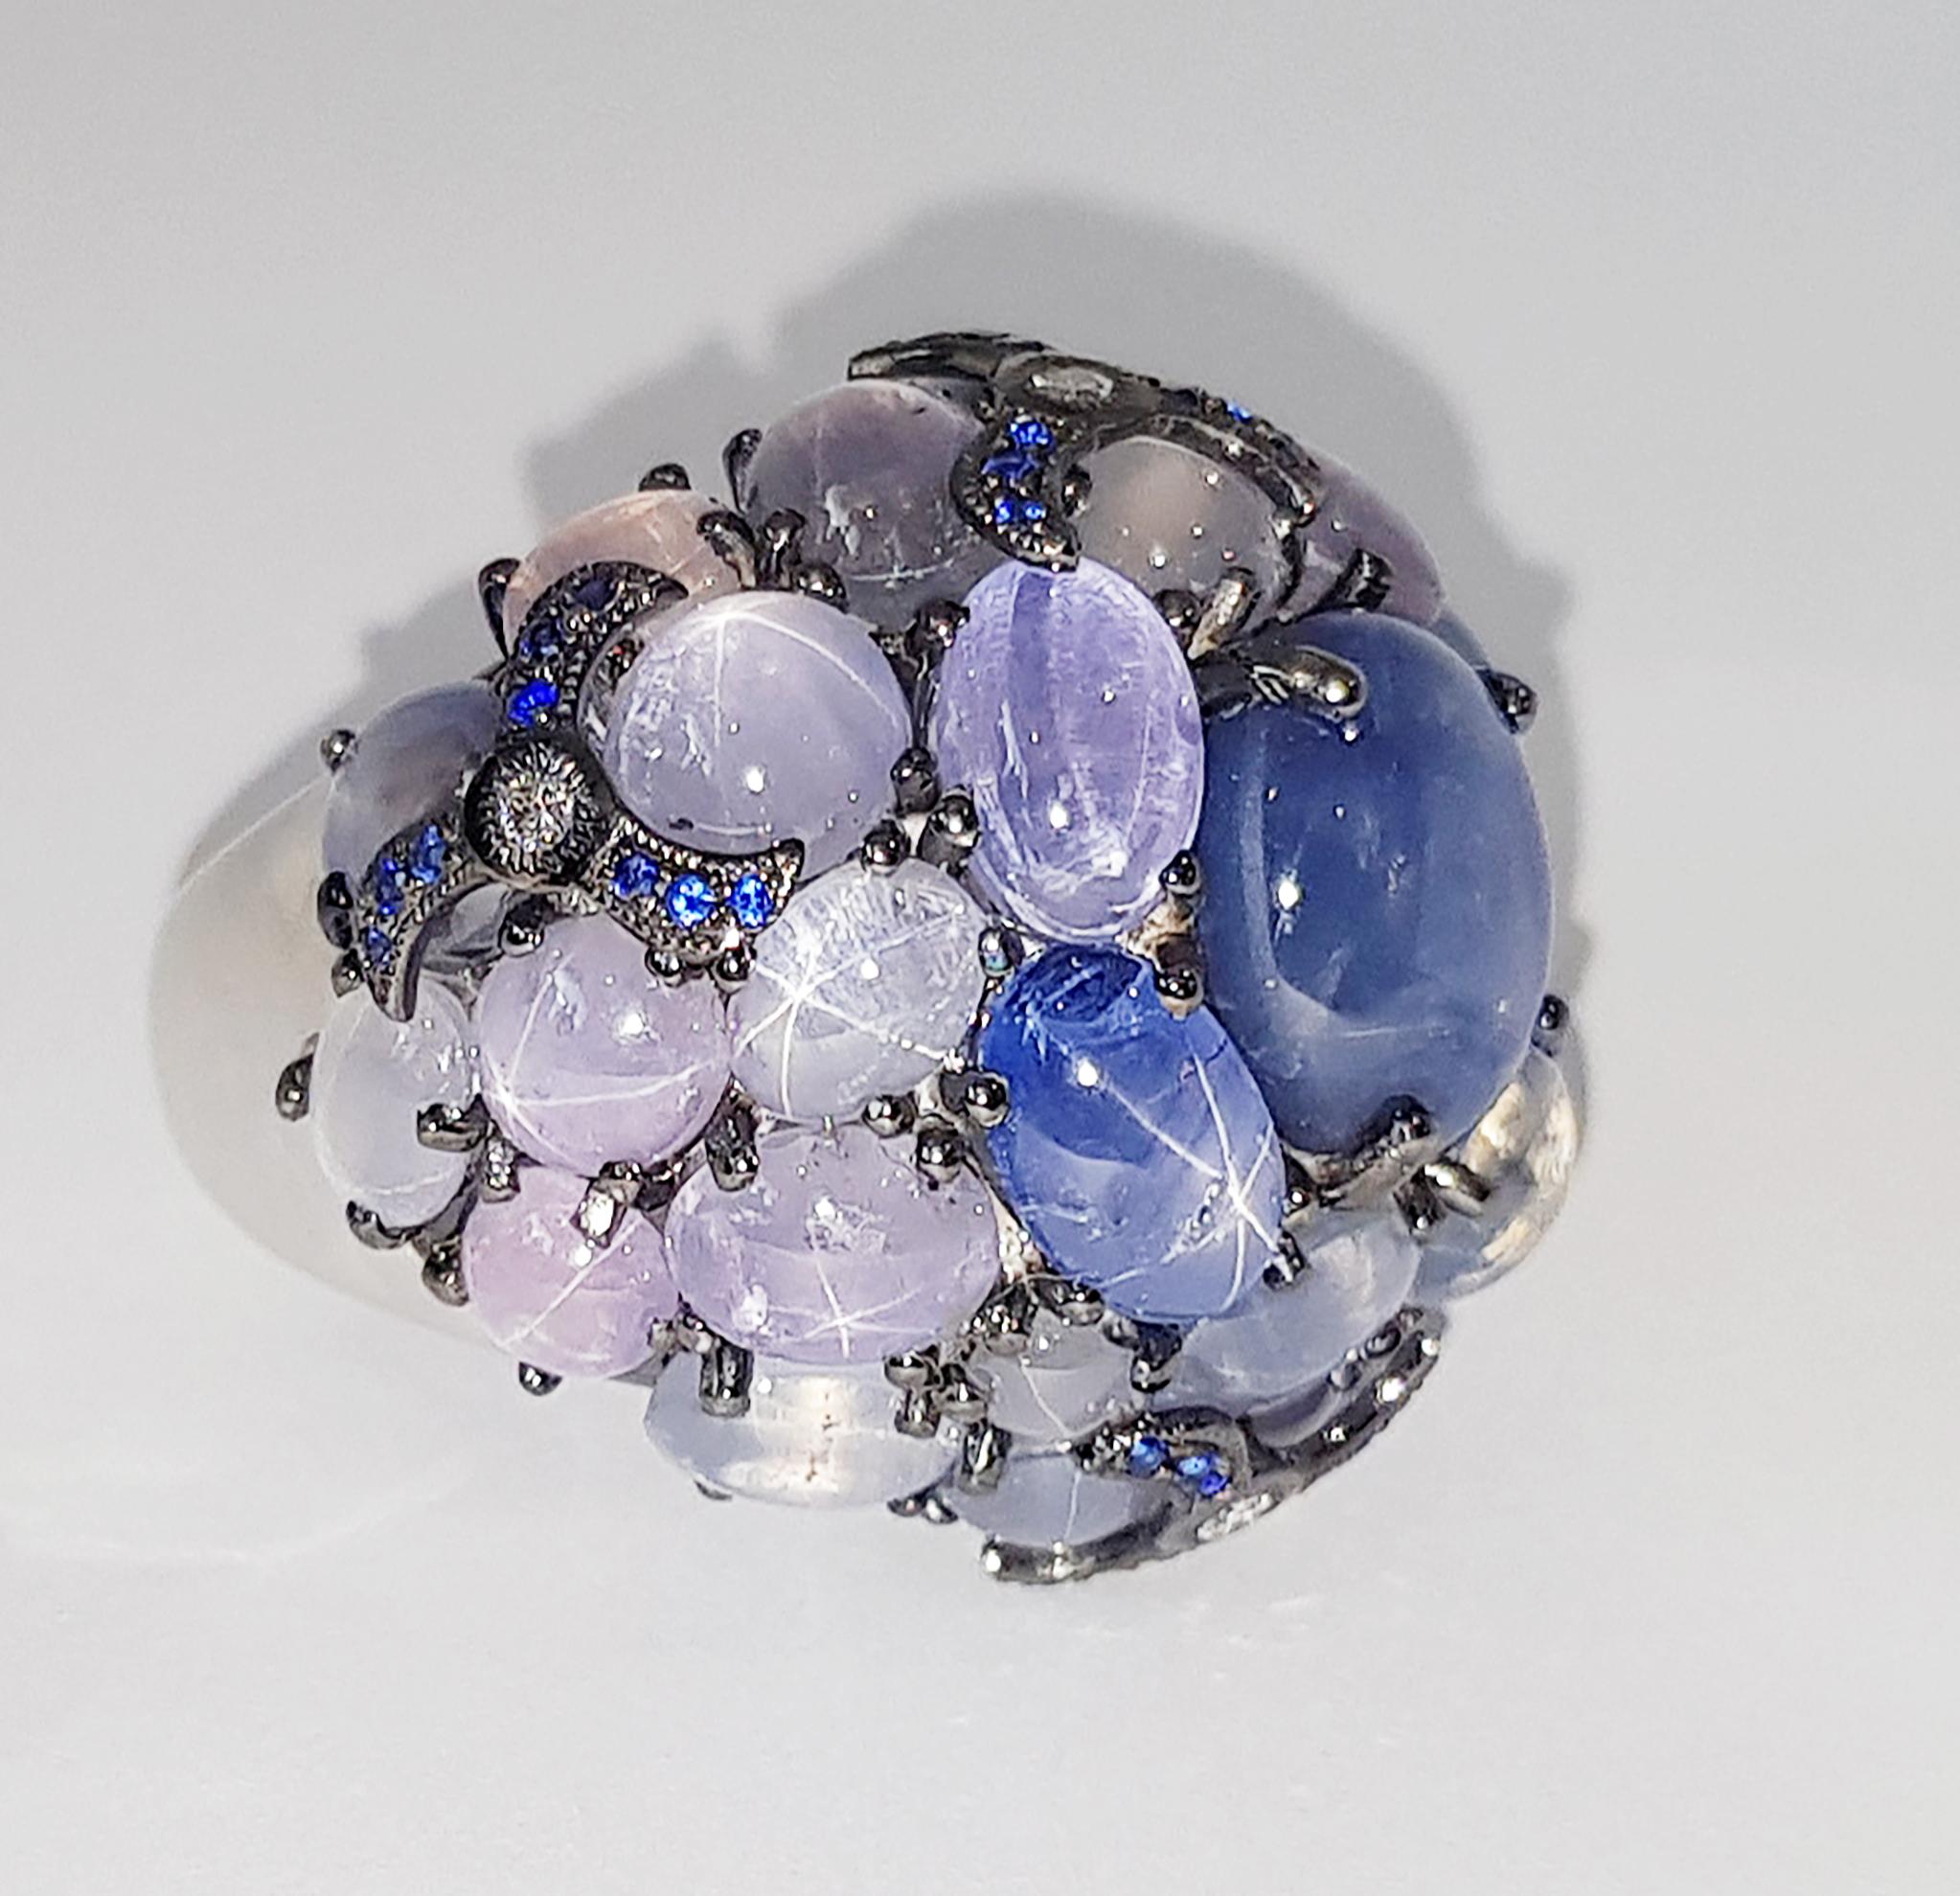 Blue Star Sapphire 42.51 carats with Blue Sapphire 0.22 carat with Diamond 0.08 carat Ring set in 18 Karat White Gold Settings

Width:  2.9 cm 
Length:  2.5 cm
Ring Size: 52
Total Weight: 25.91 grams

